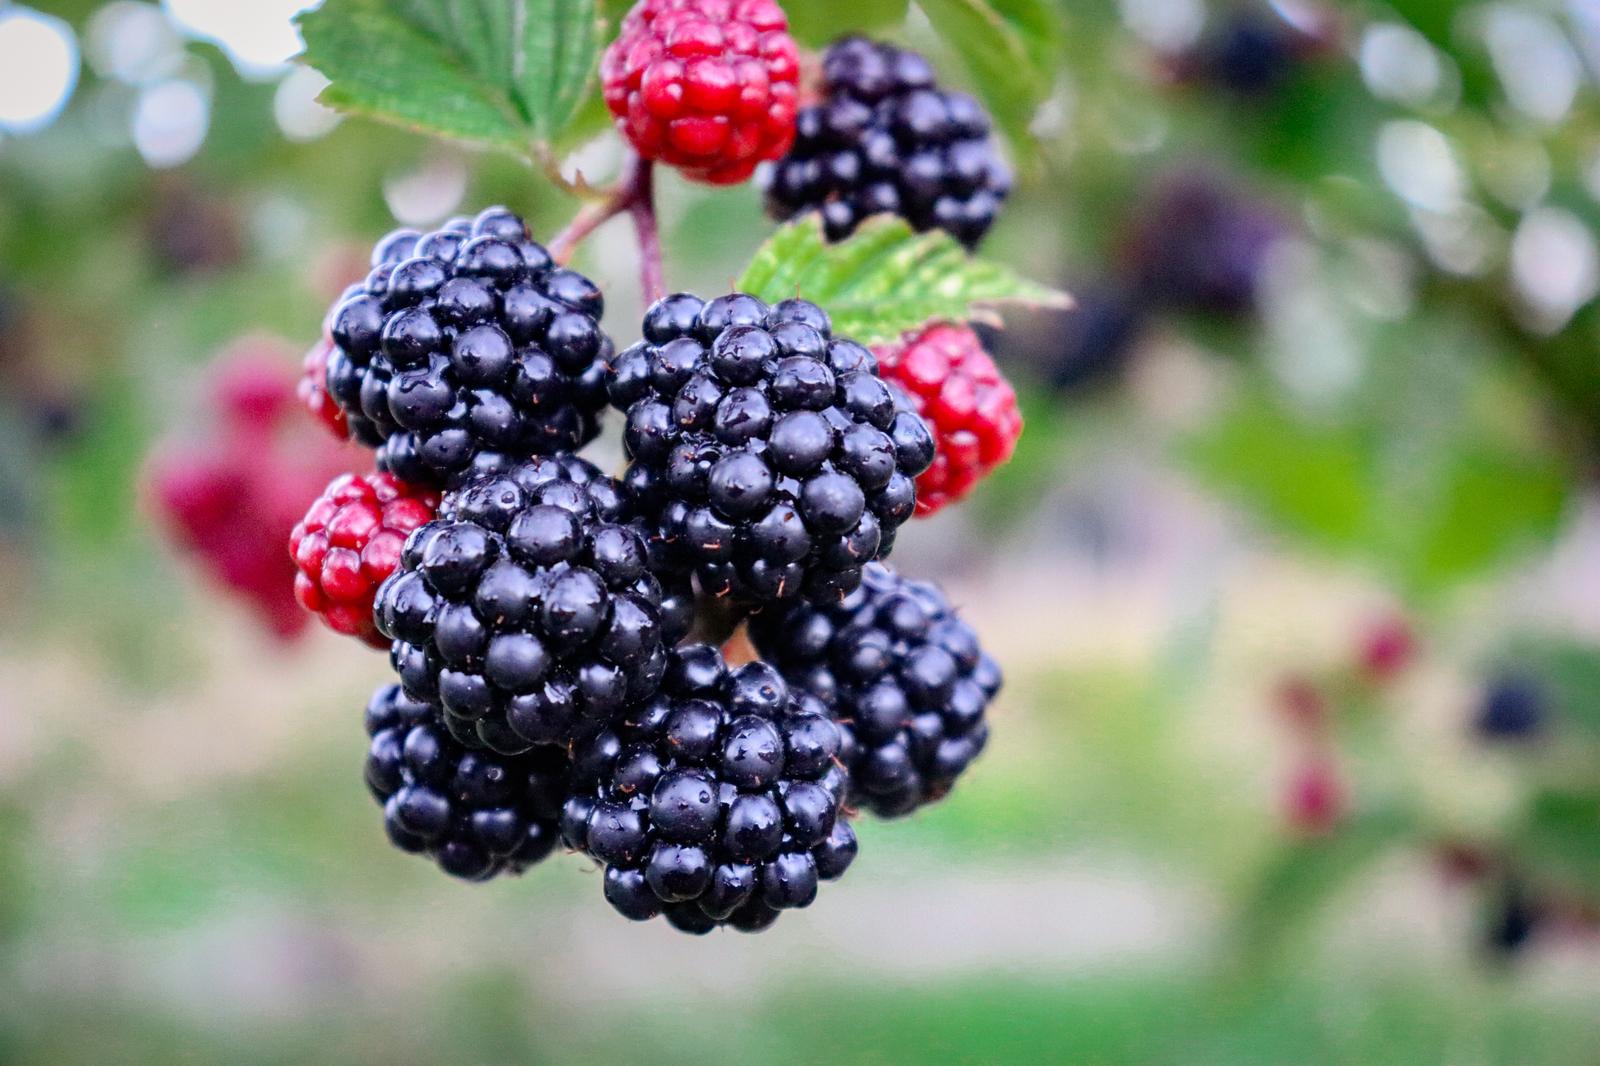 Do You Actually Know The Official Names Of These Everyday Items? Blackberries